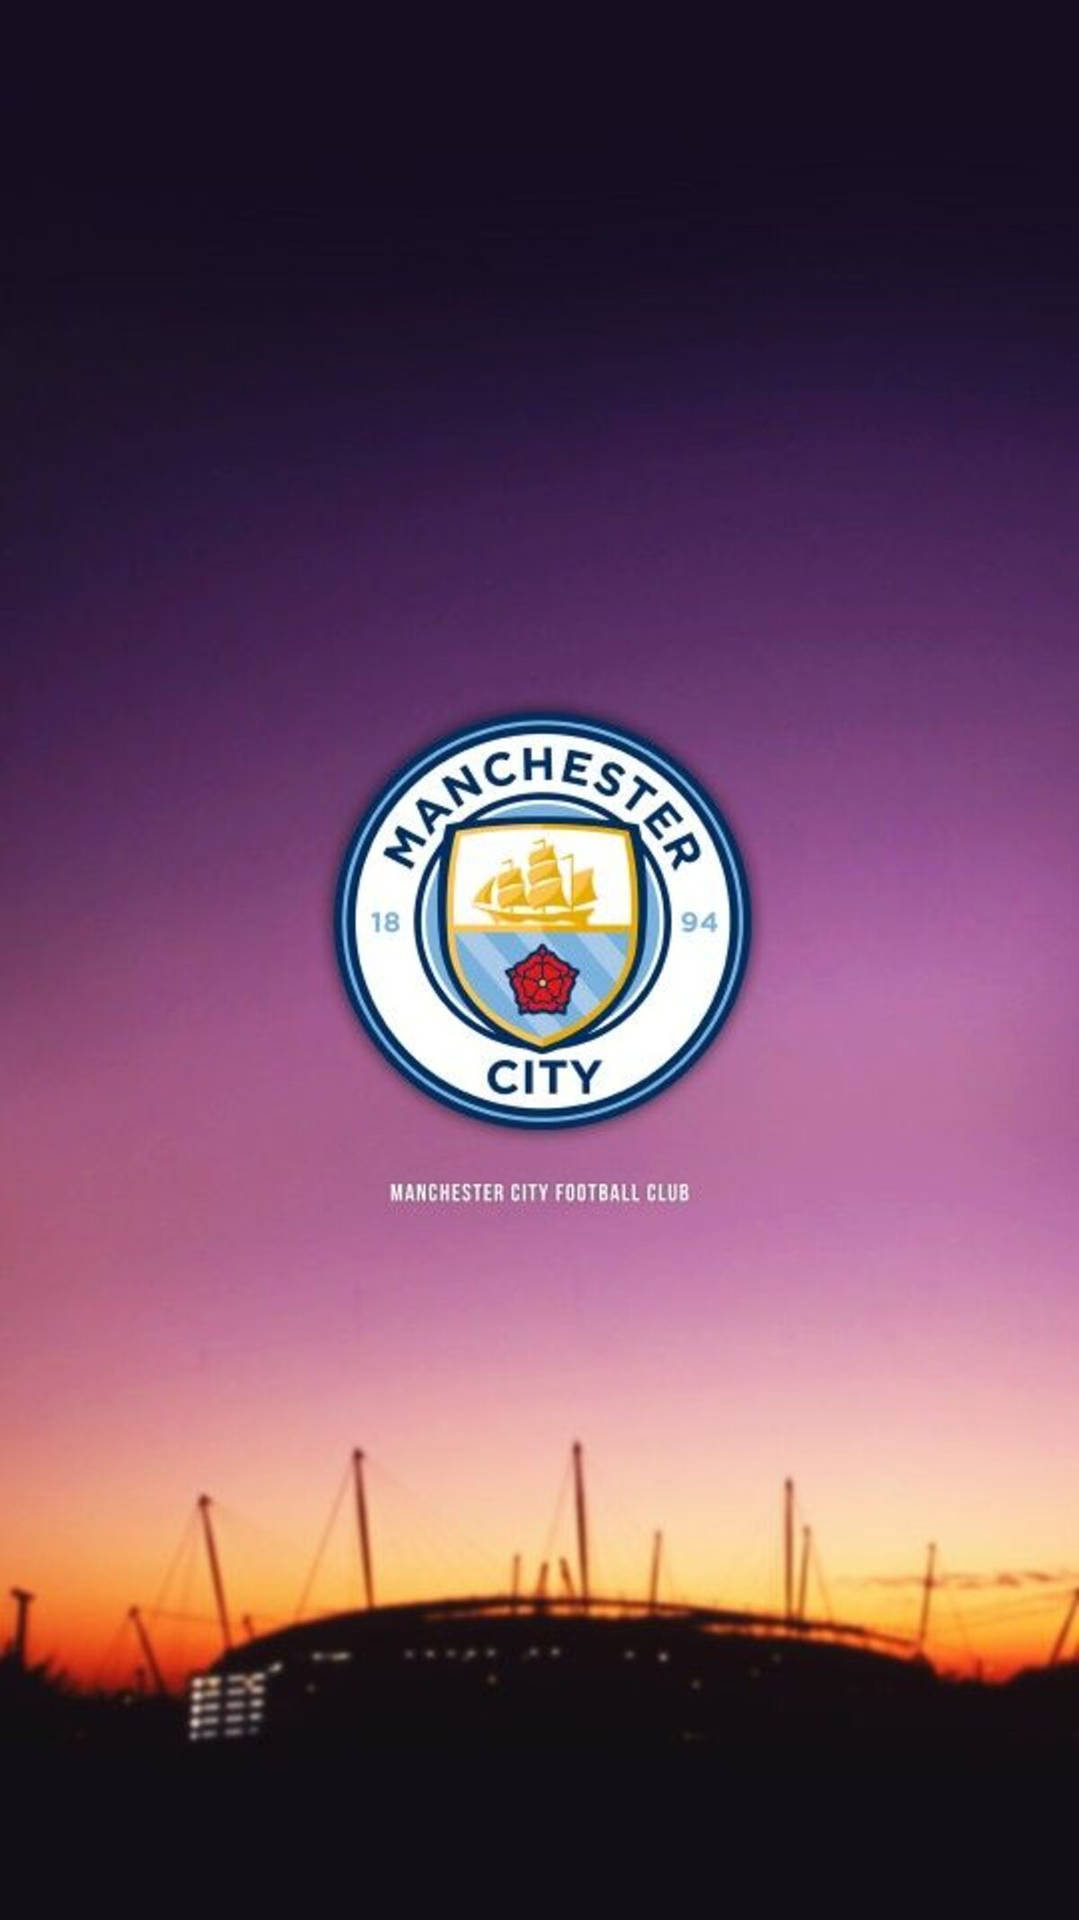 Man City’s Logo Illuminated Against A Magnificent Purple Sky Background